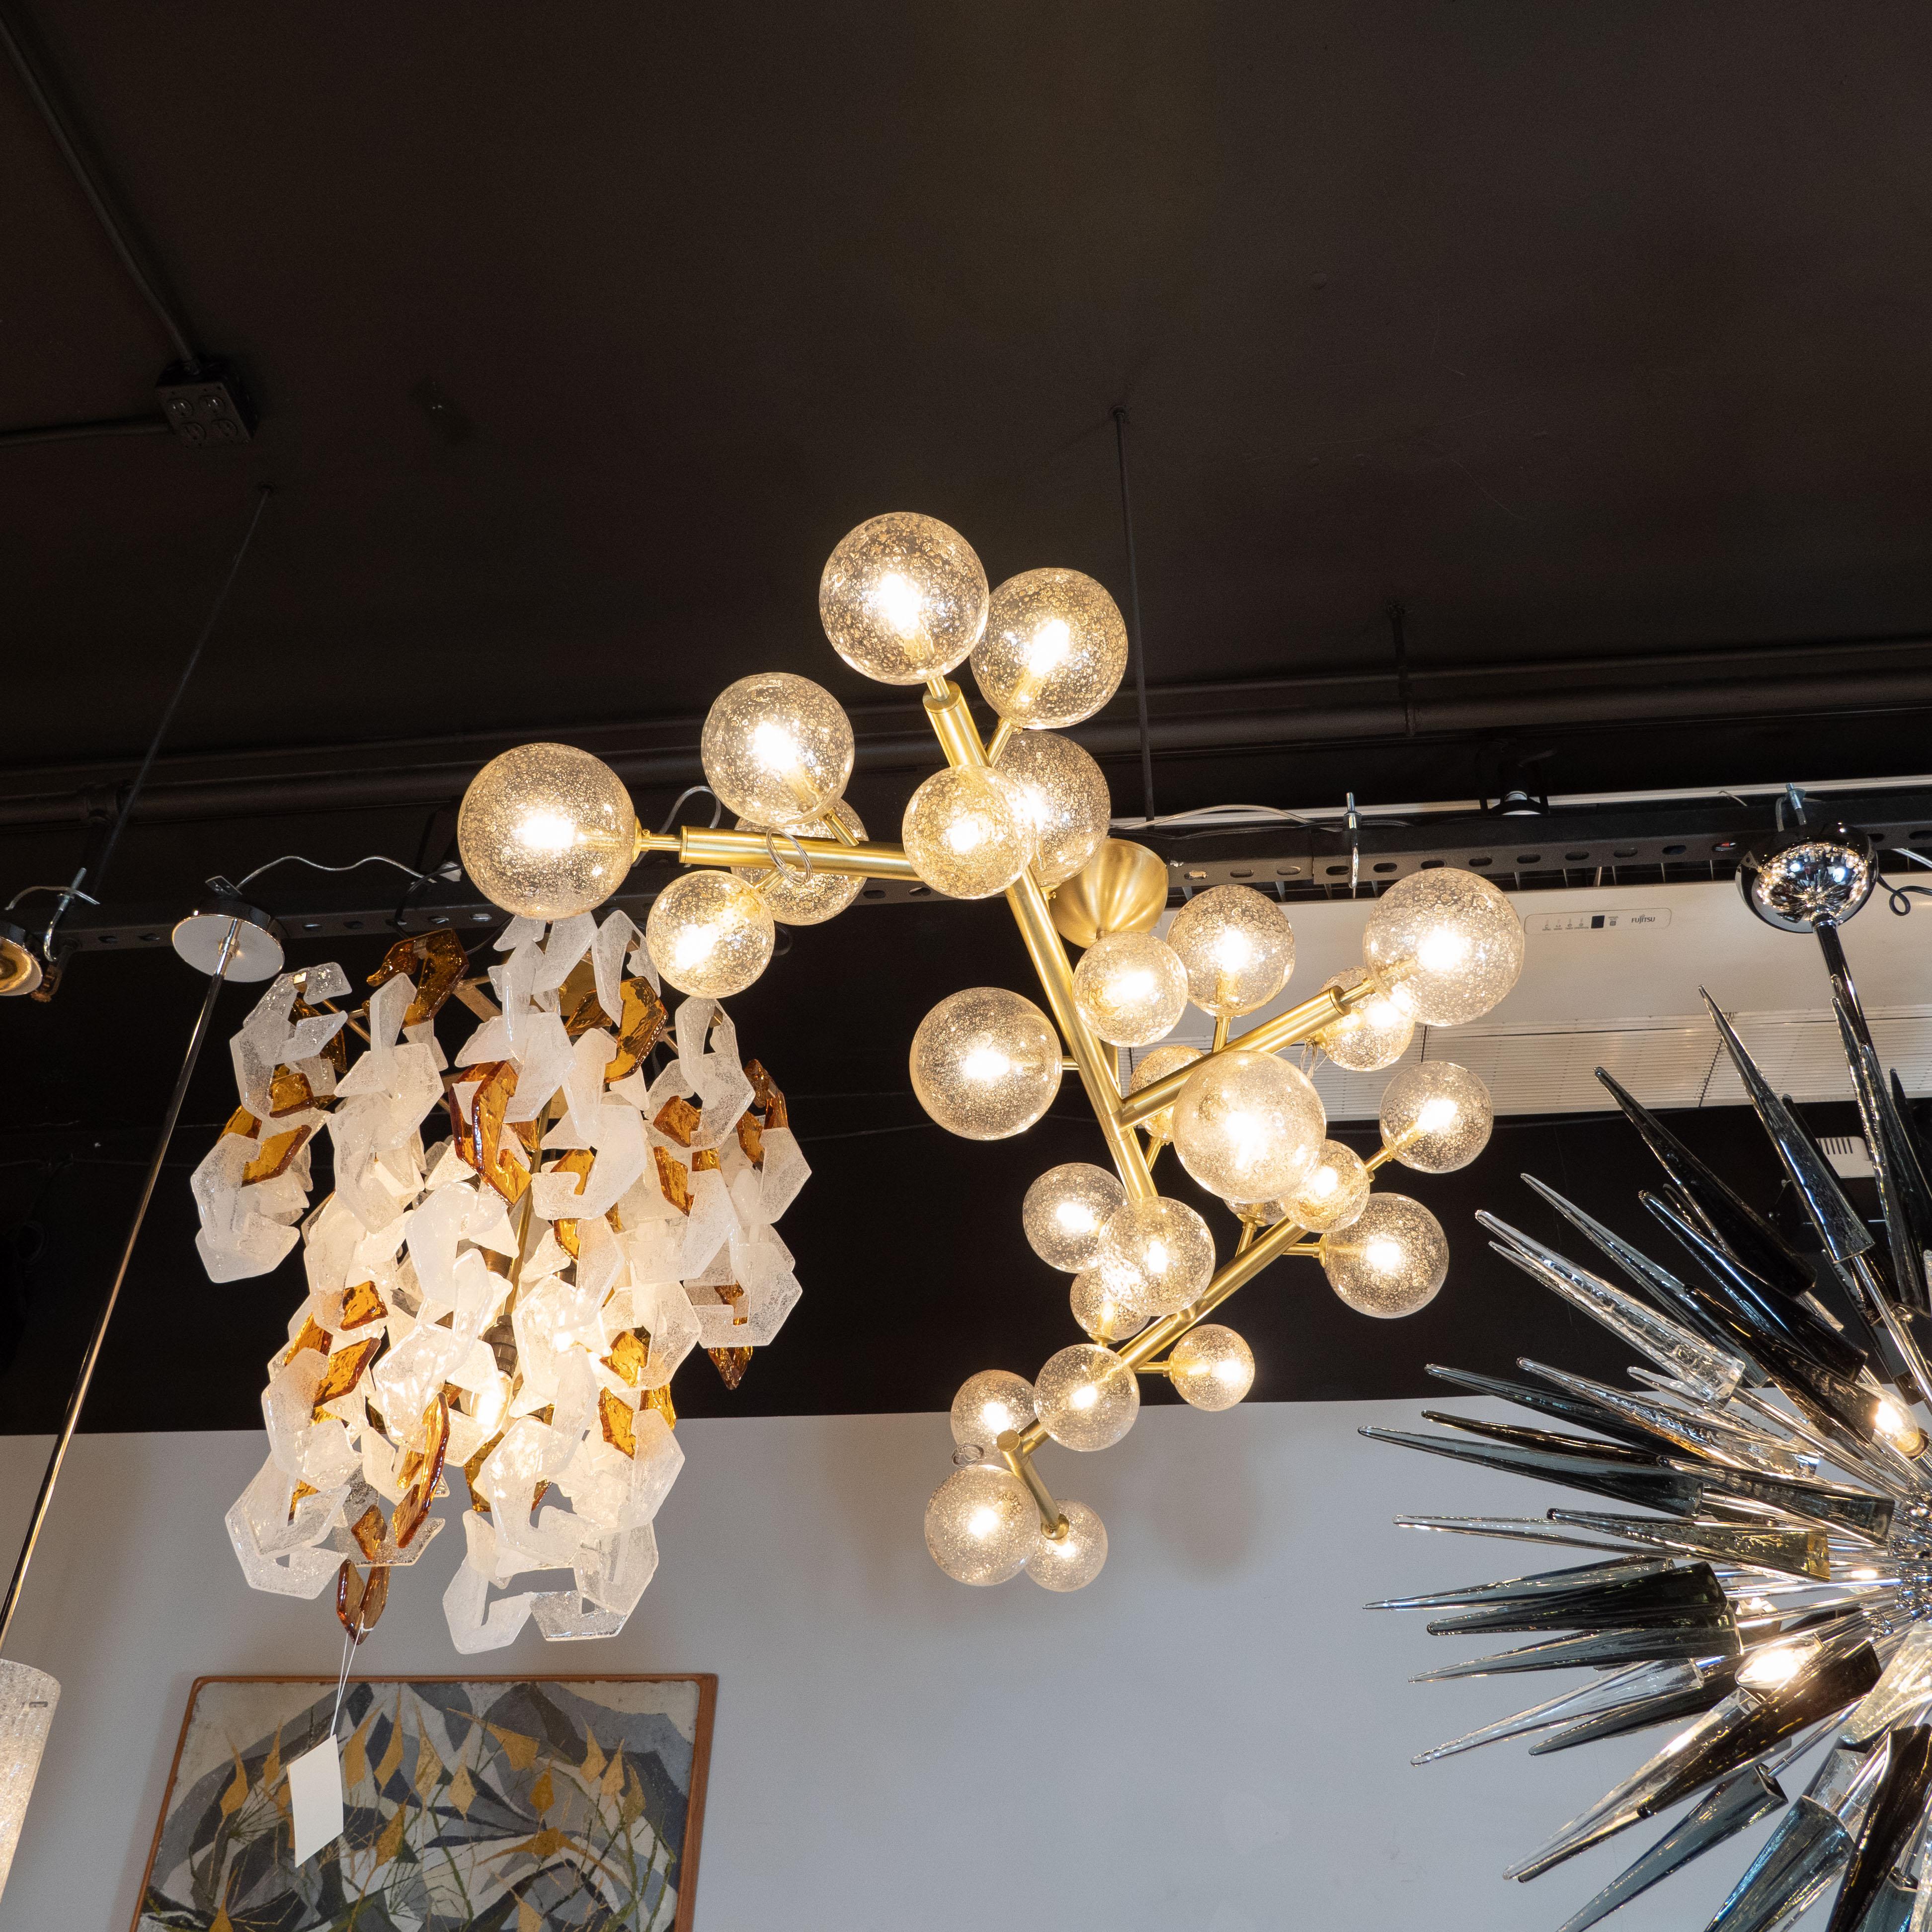 This stunning and graphic modernist brass snowflake chandelier was realized in Murano, Italy- the island off the coast of Venice renowned for centuries for its superlative glass production. It features an organic branch-like form in brass capped at